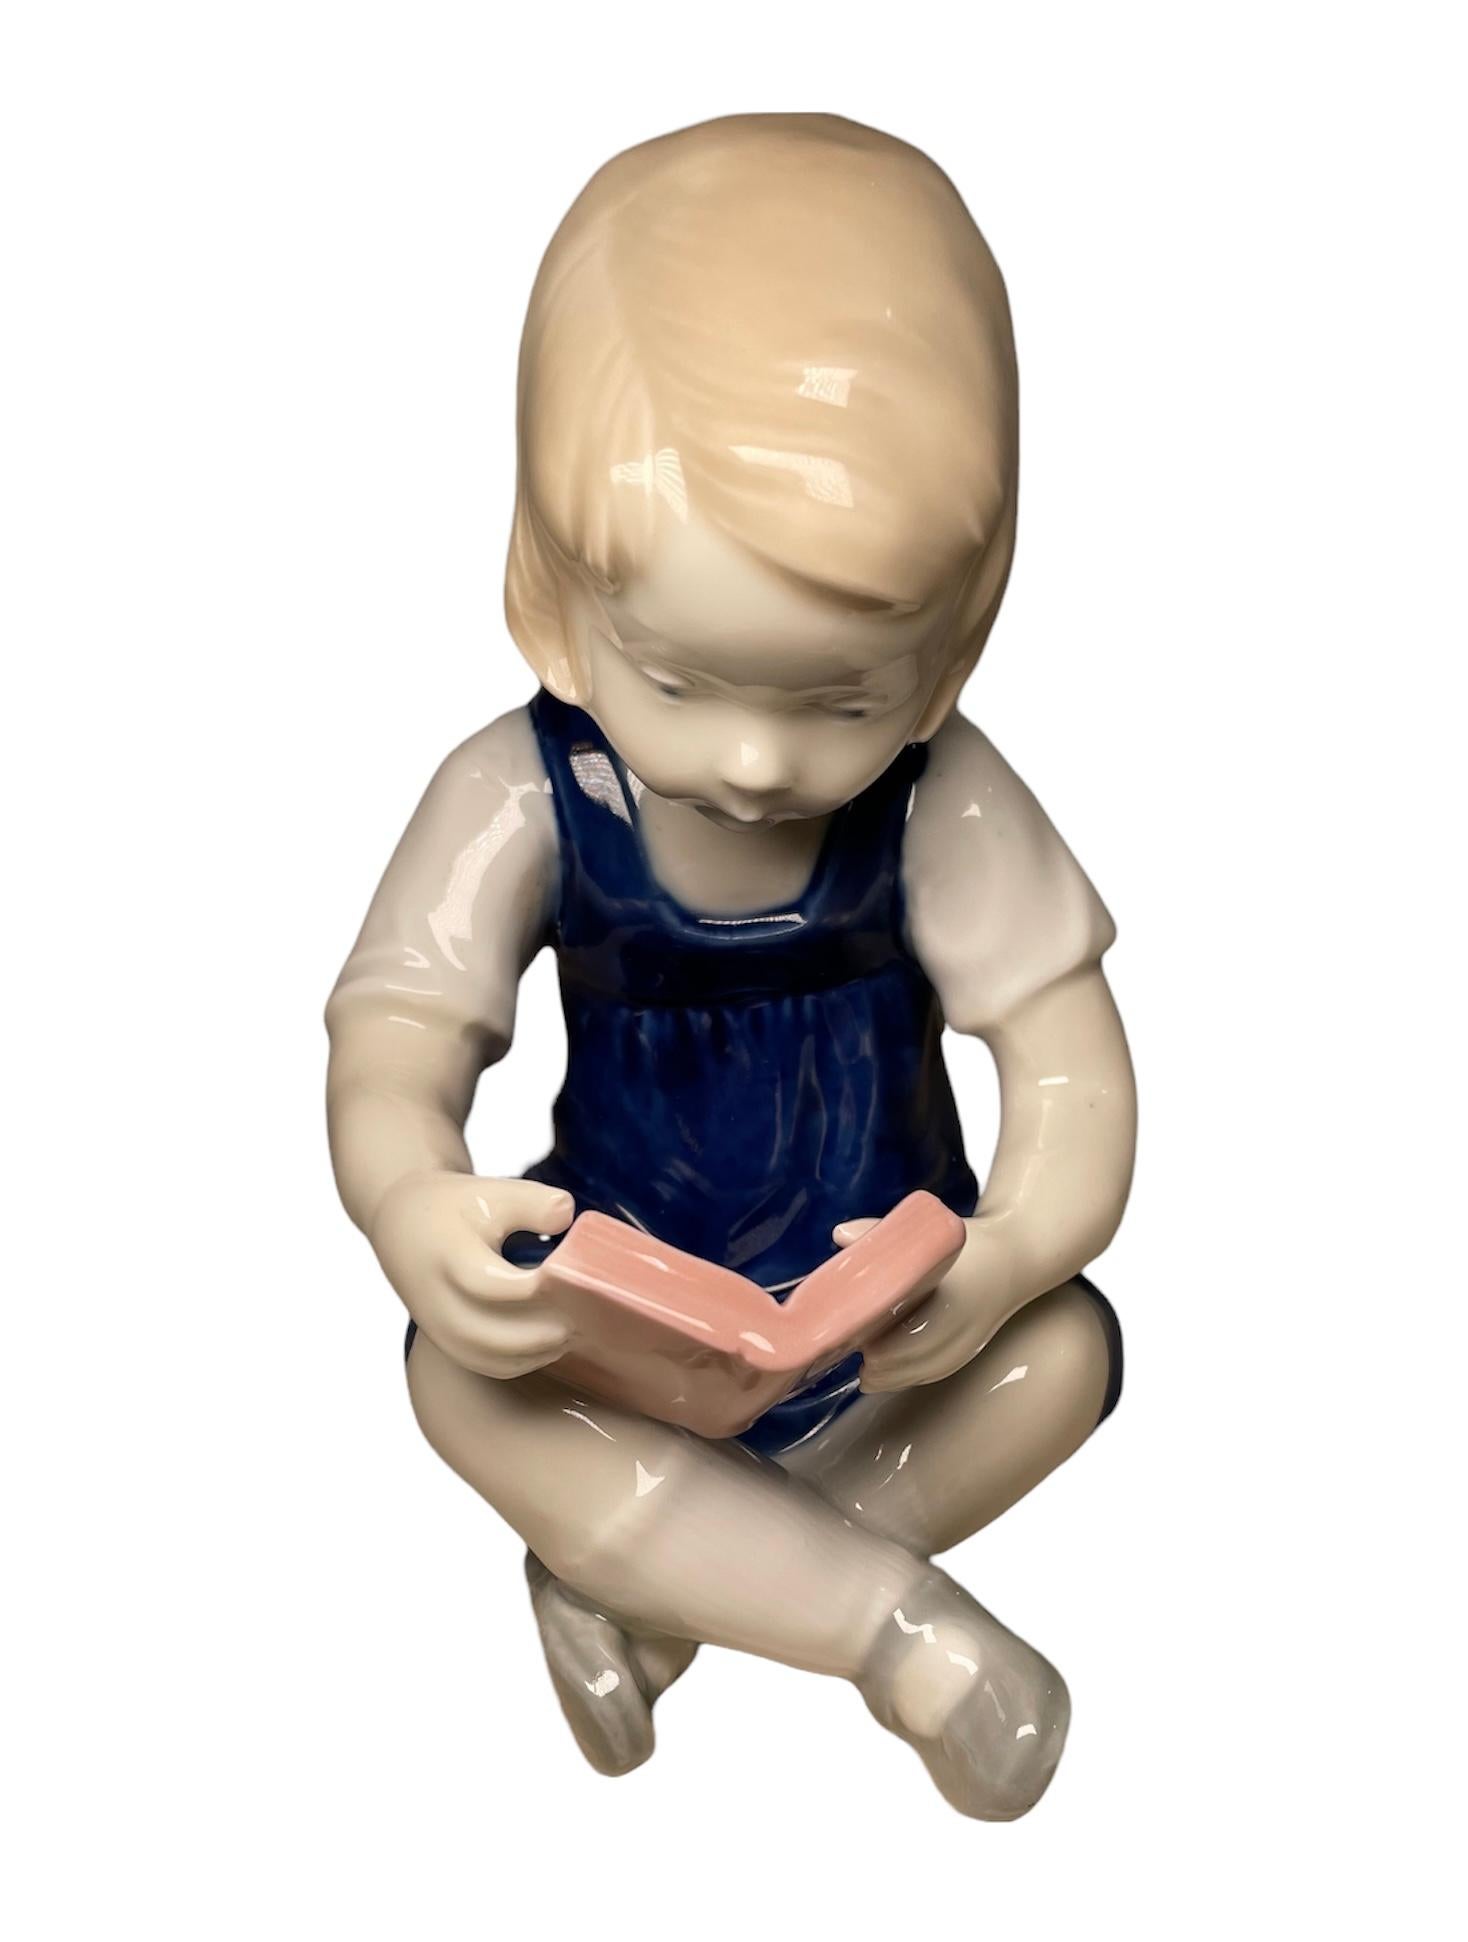 20th Century Carl Scheidig German Hand Painted Porcelain Figurine of a Girl Reading a Book